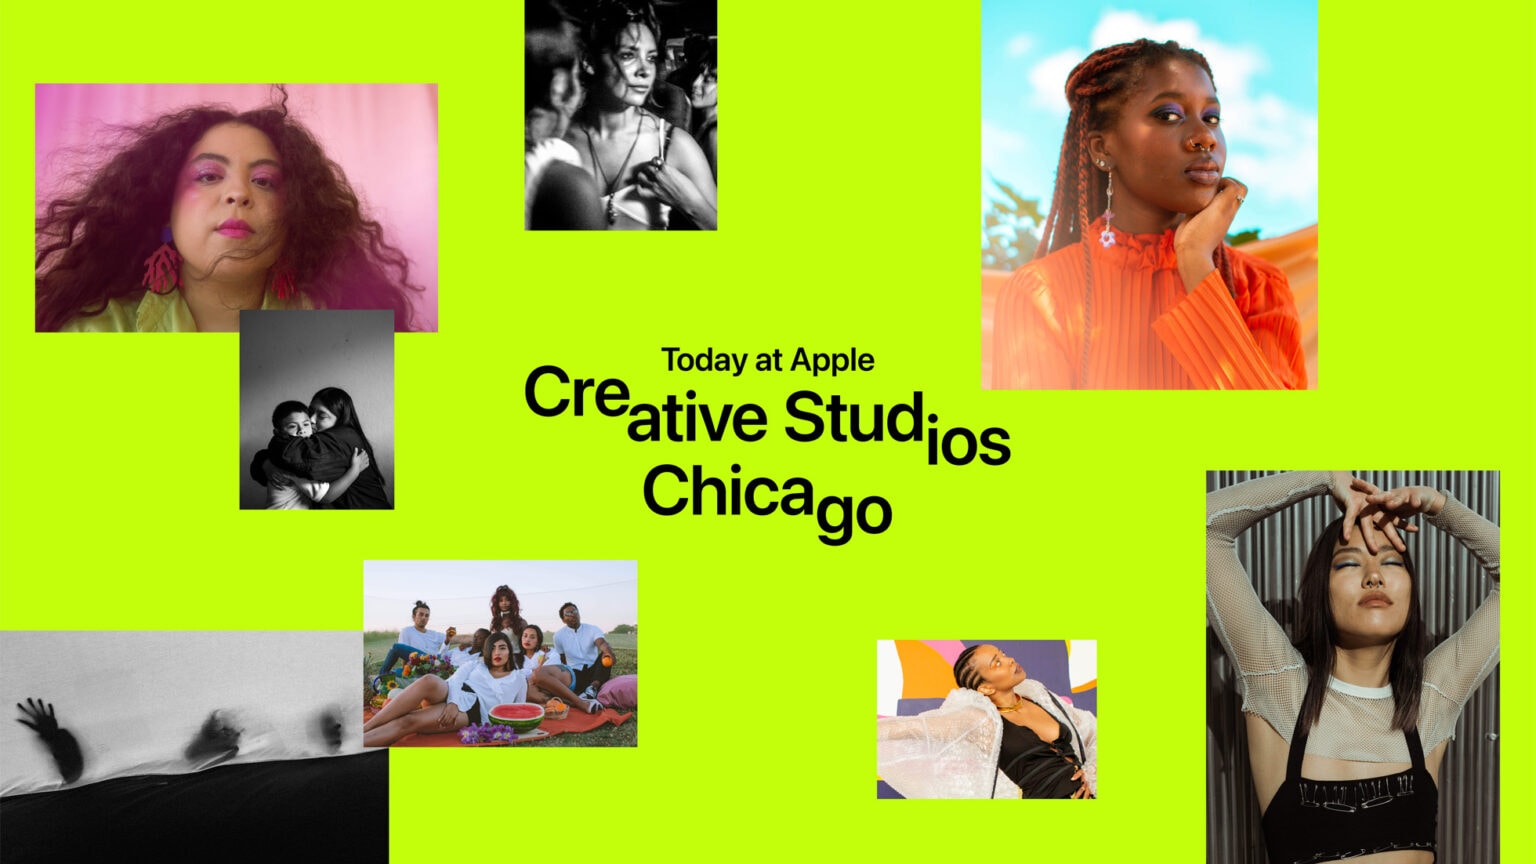 Today at Apple Creative Studios Chicago